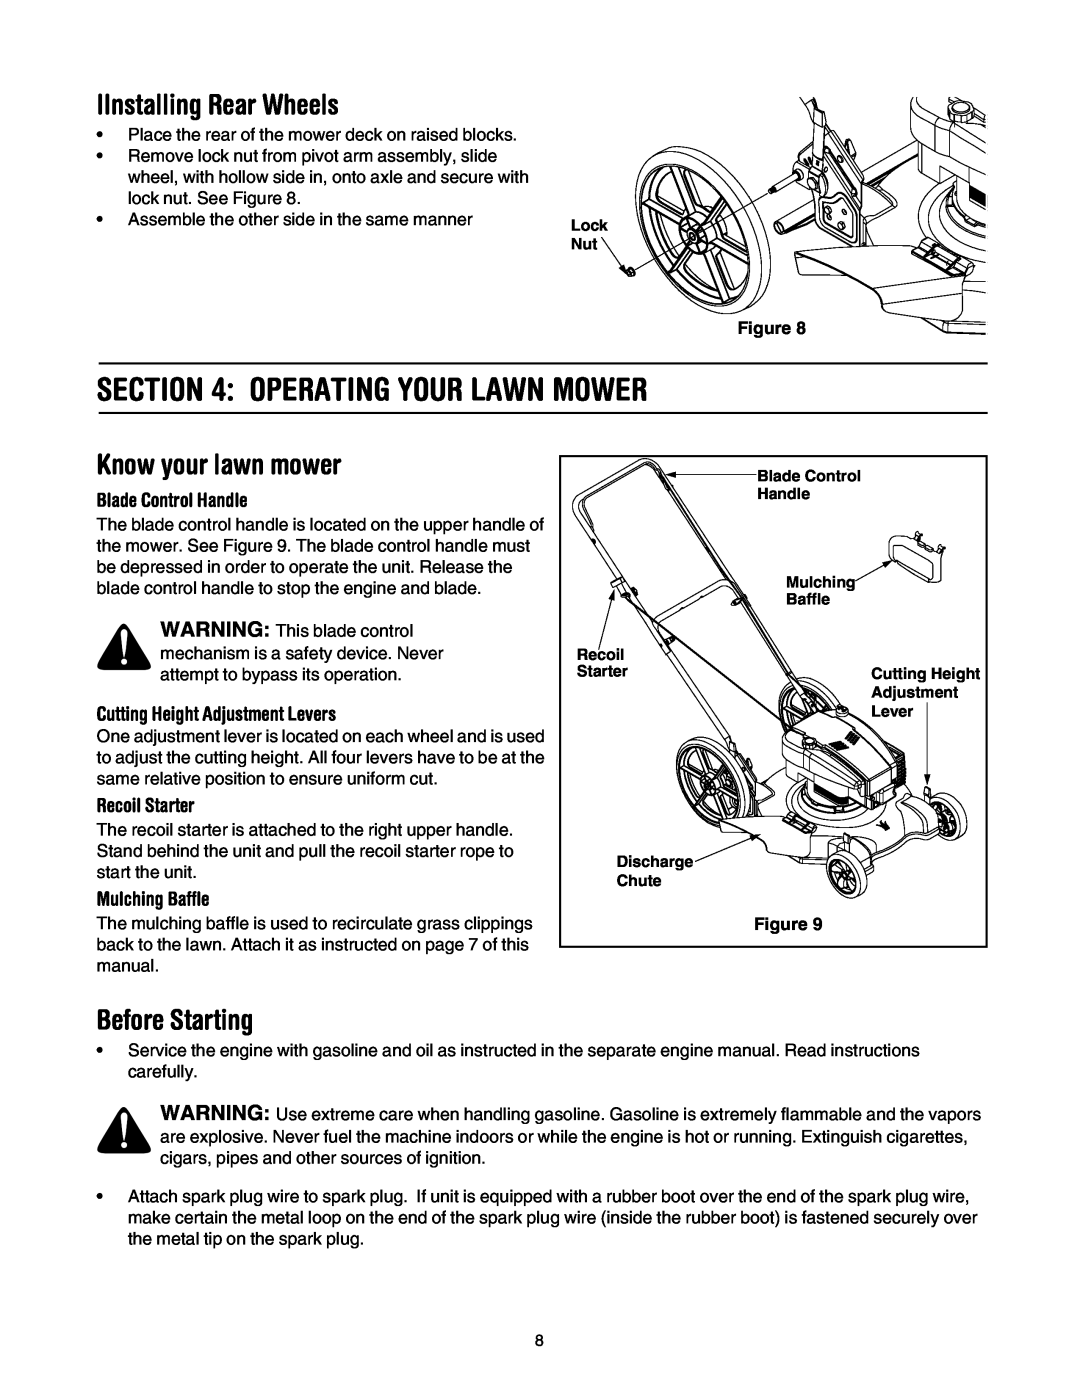 MTD 503 Operating Your Lawn Mower, IInstalling Rear Wheels, Know your lawn mower, Before Starting, Blade Control Handle 